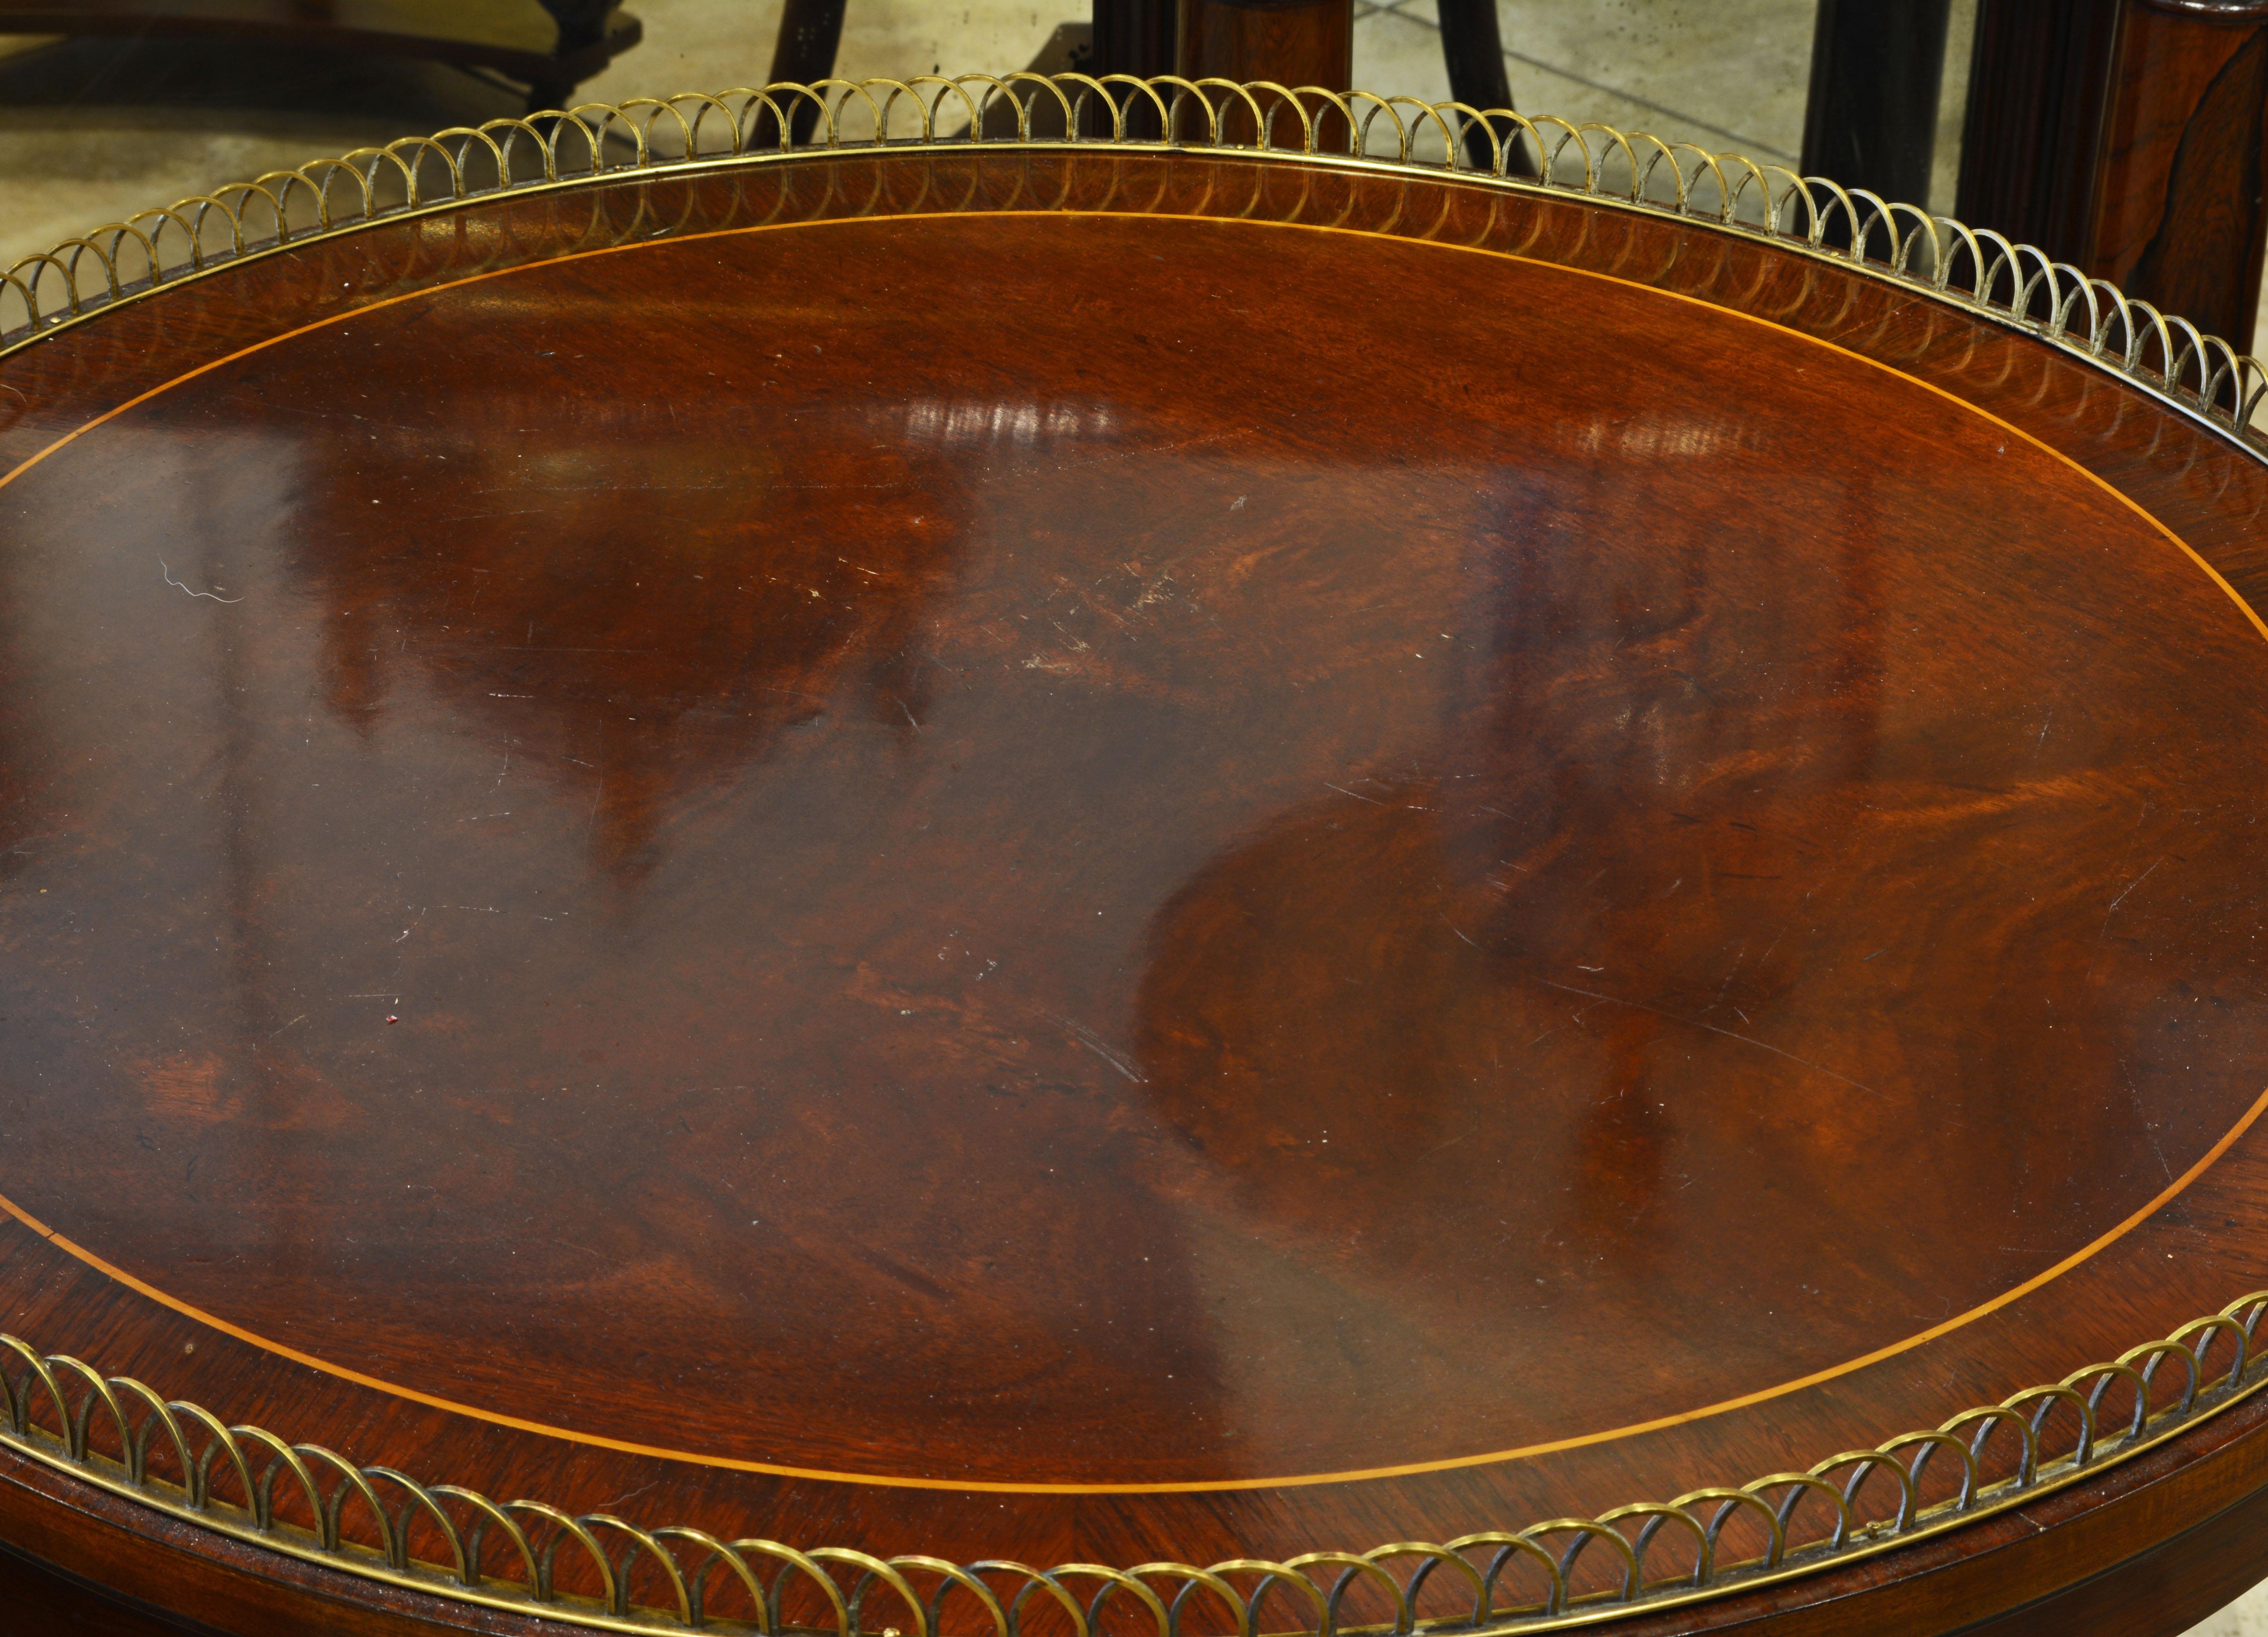 This fine pair of French Directoire style tables feature rosewood banded mahogany tops edged by circle segment bronze galleries and supported by three curved legs carved with scrolls united by a second tier gallery shelf and resting on a shaped